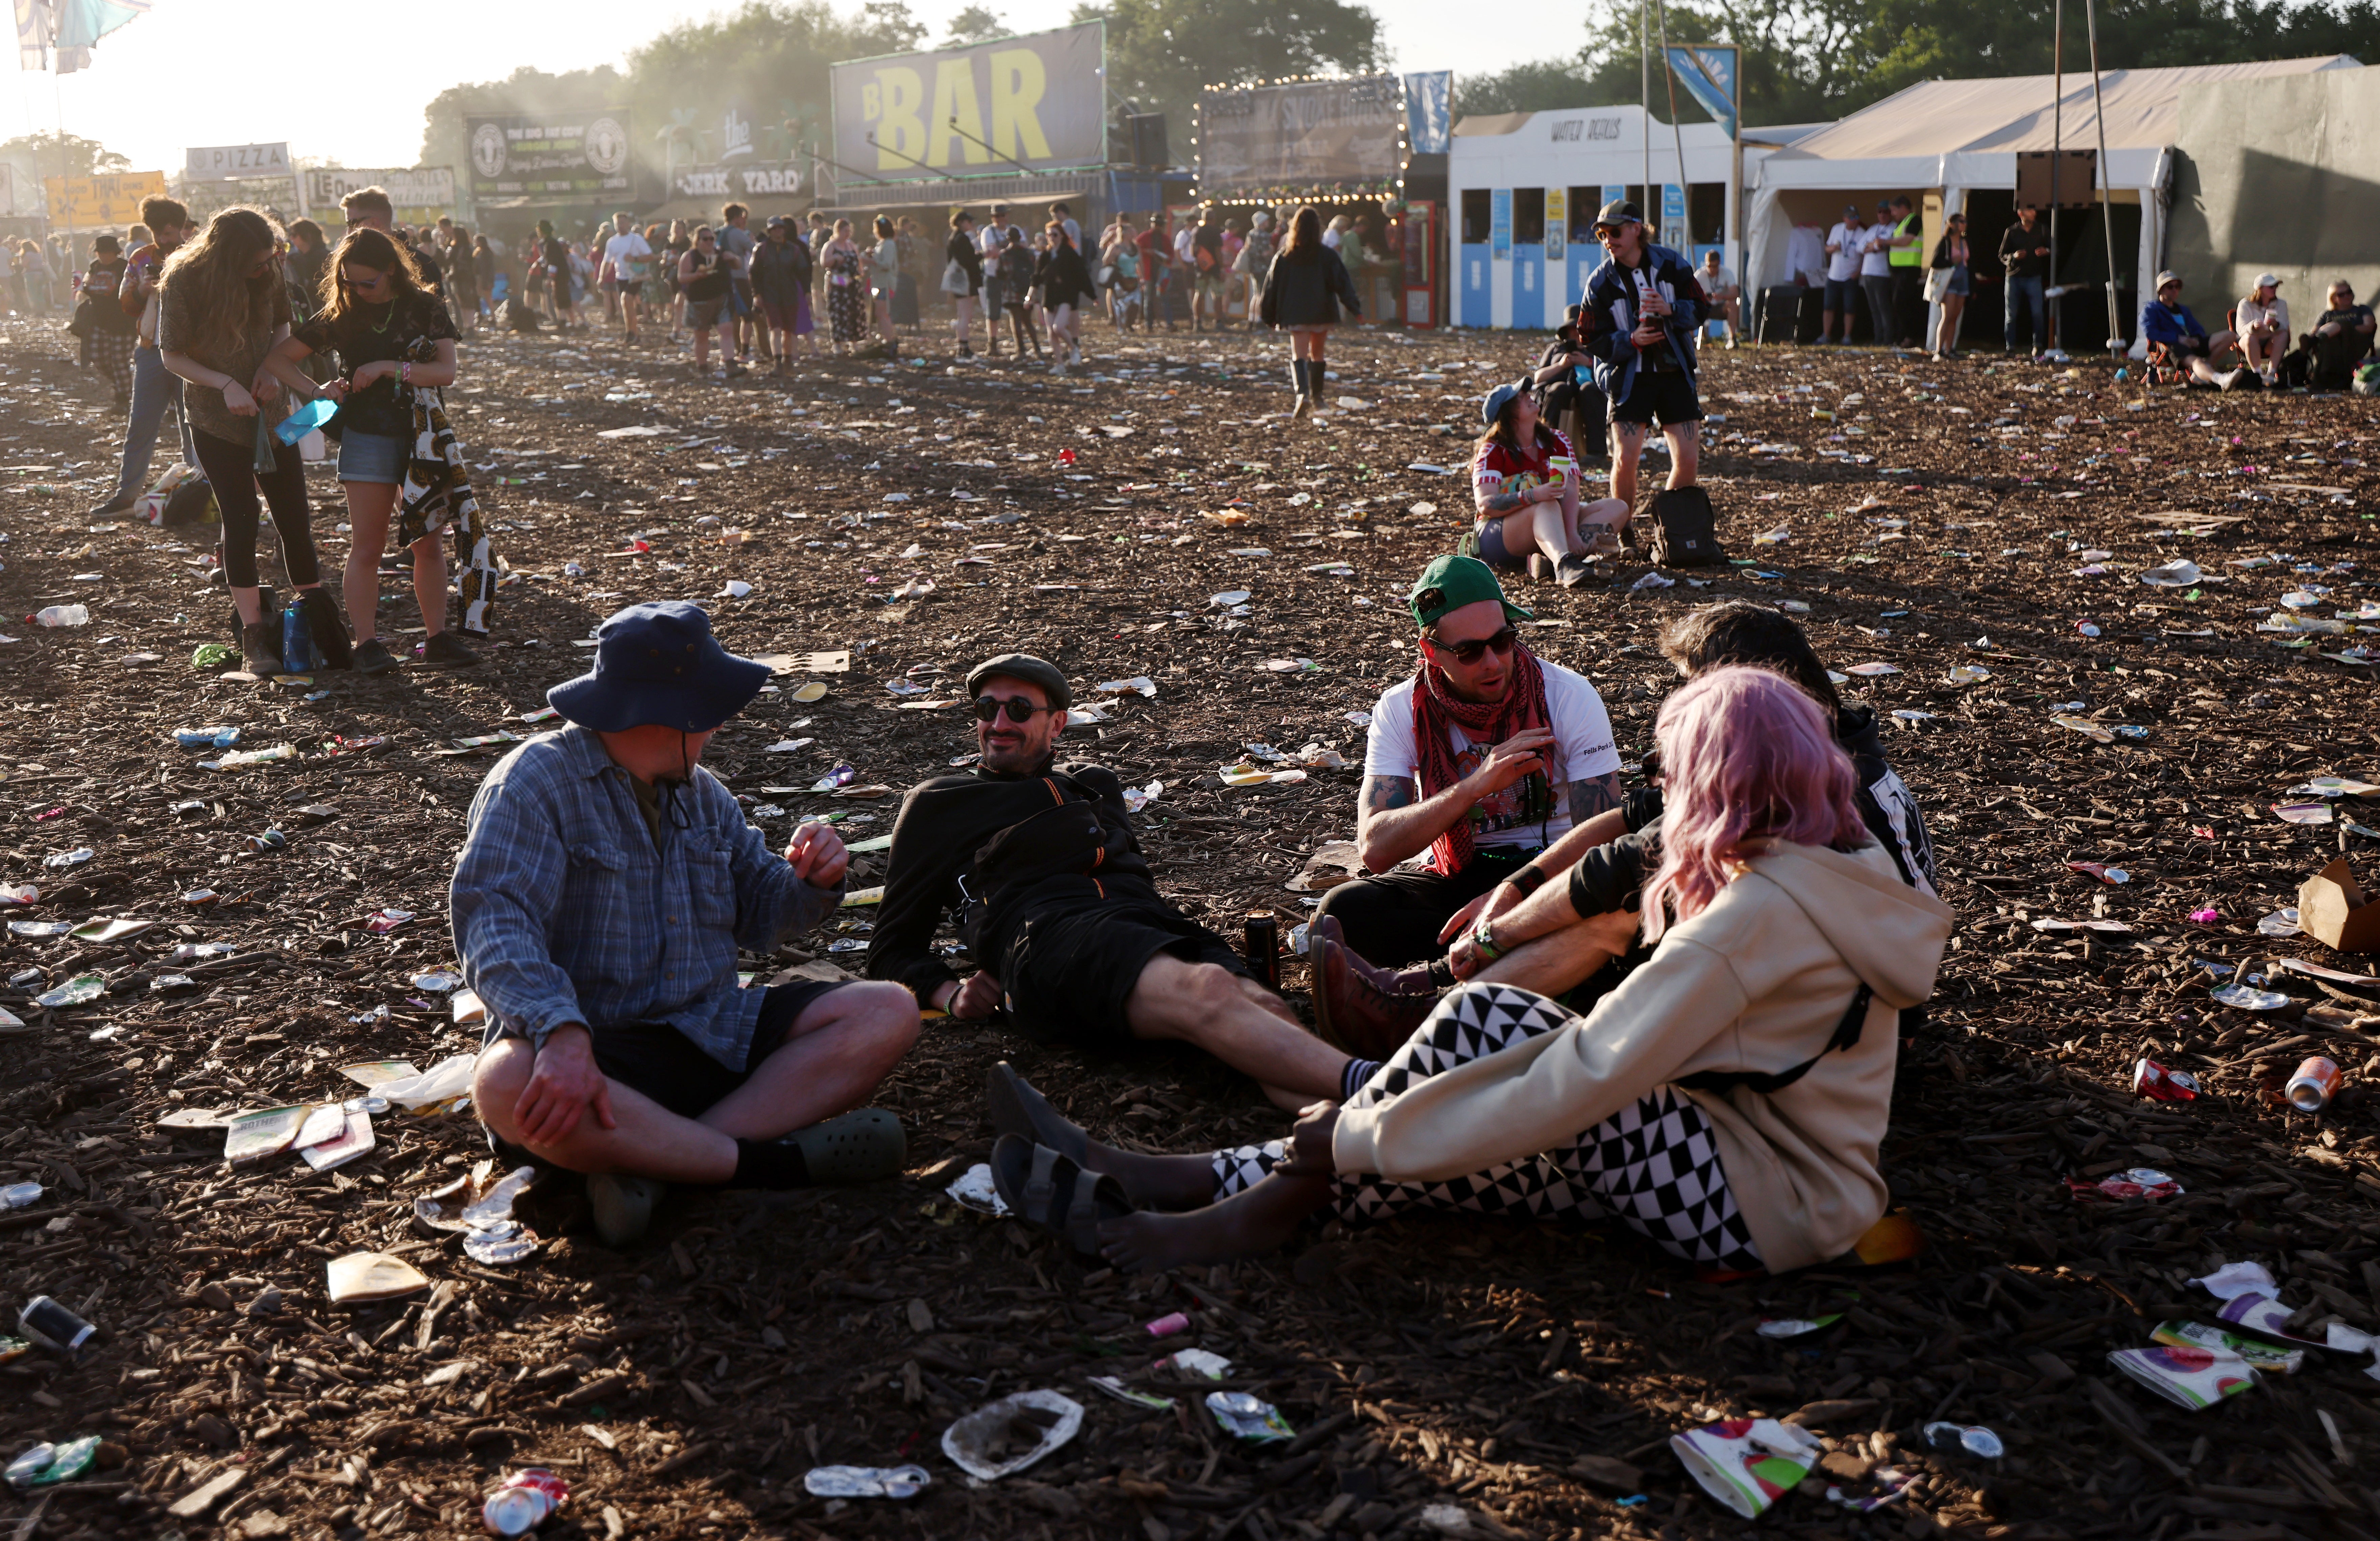 Festival-goers sit amongst rubbish on the third day of the festival